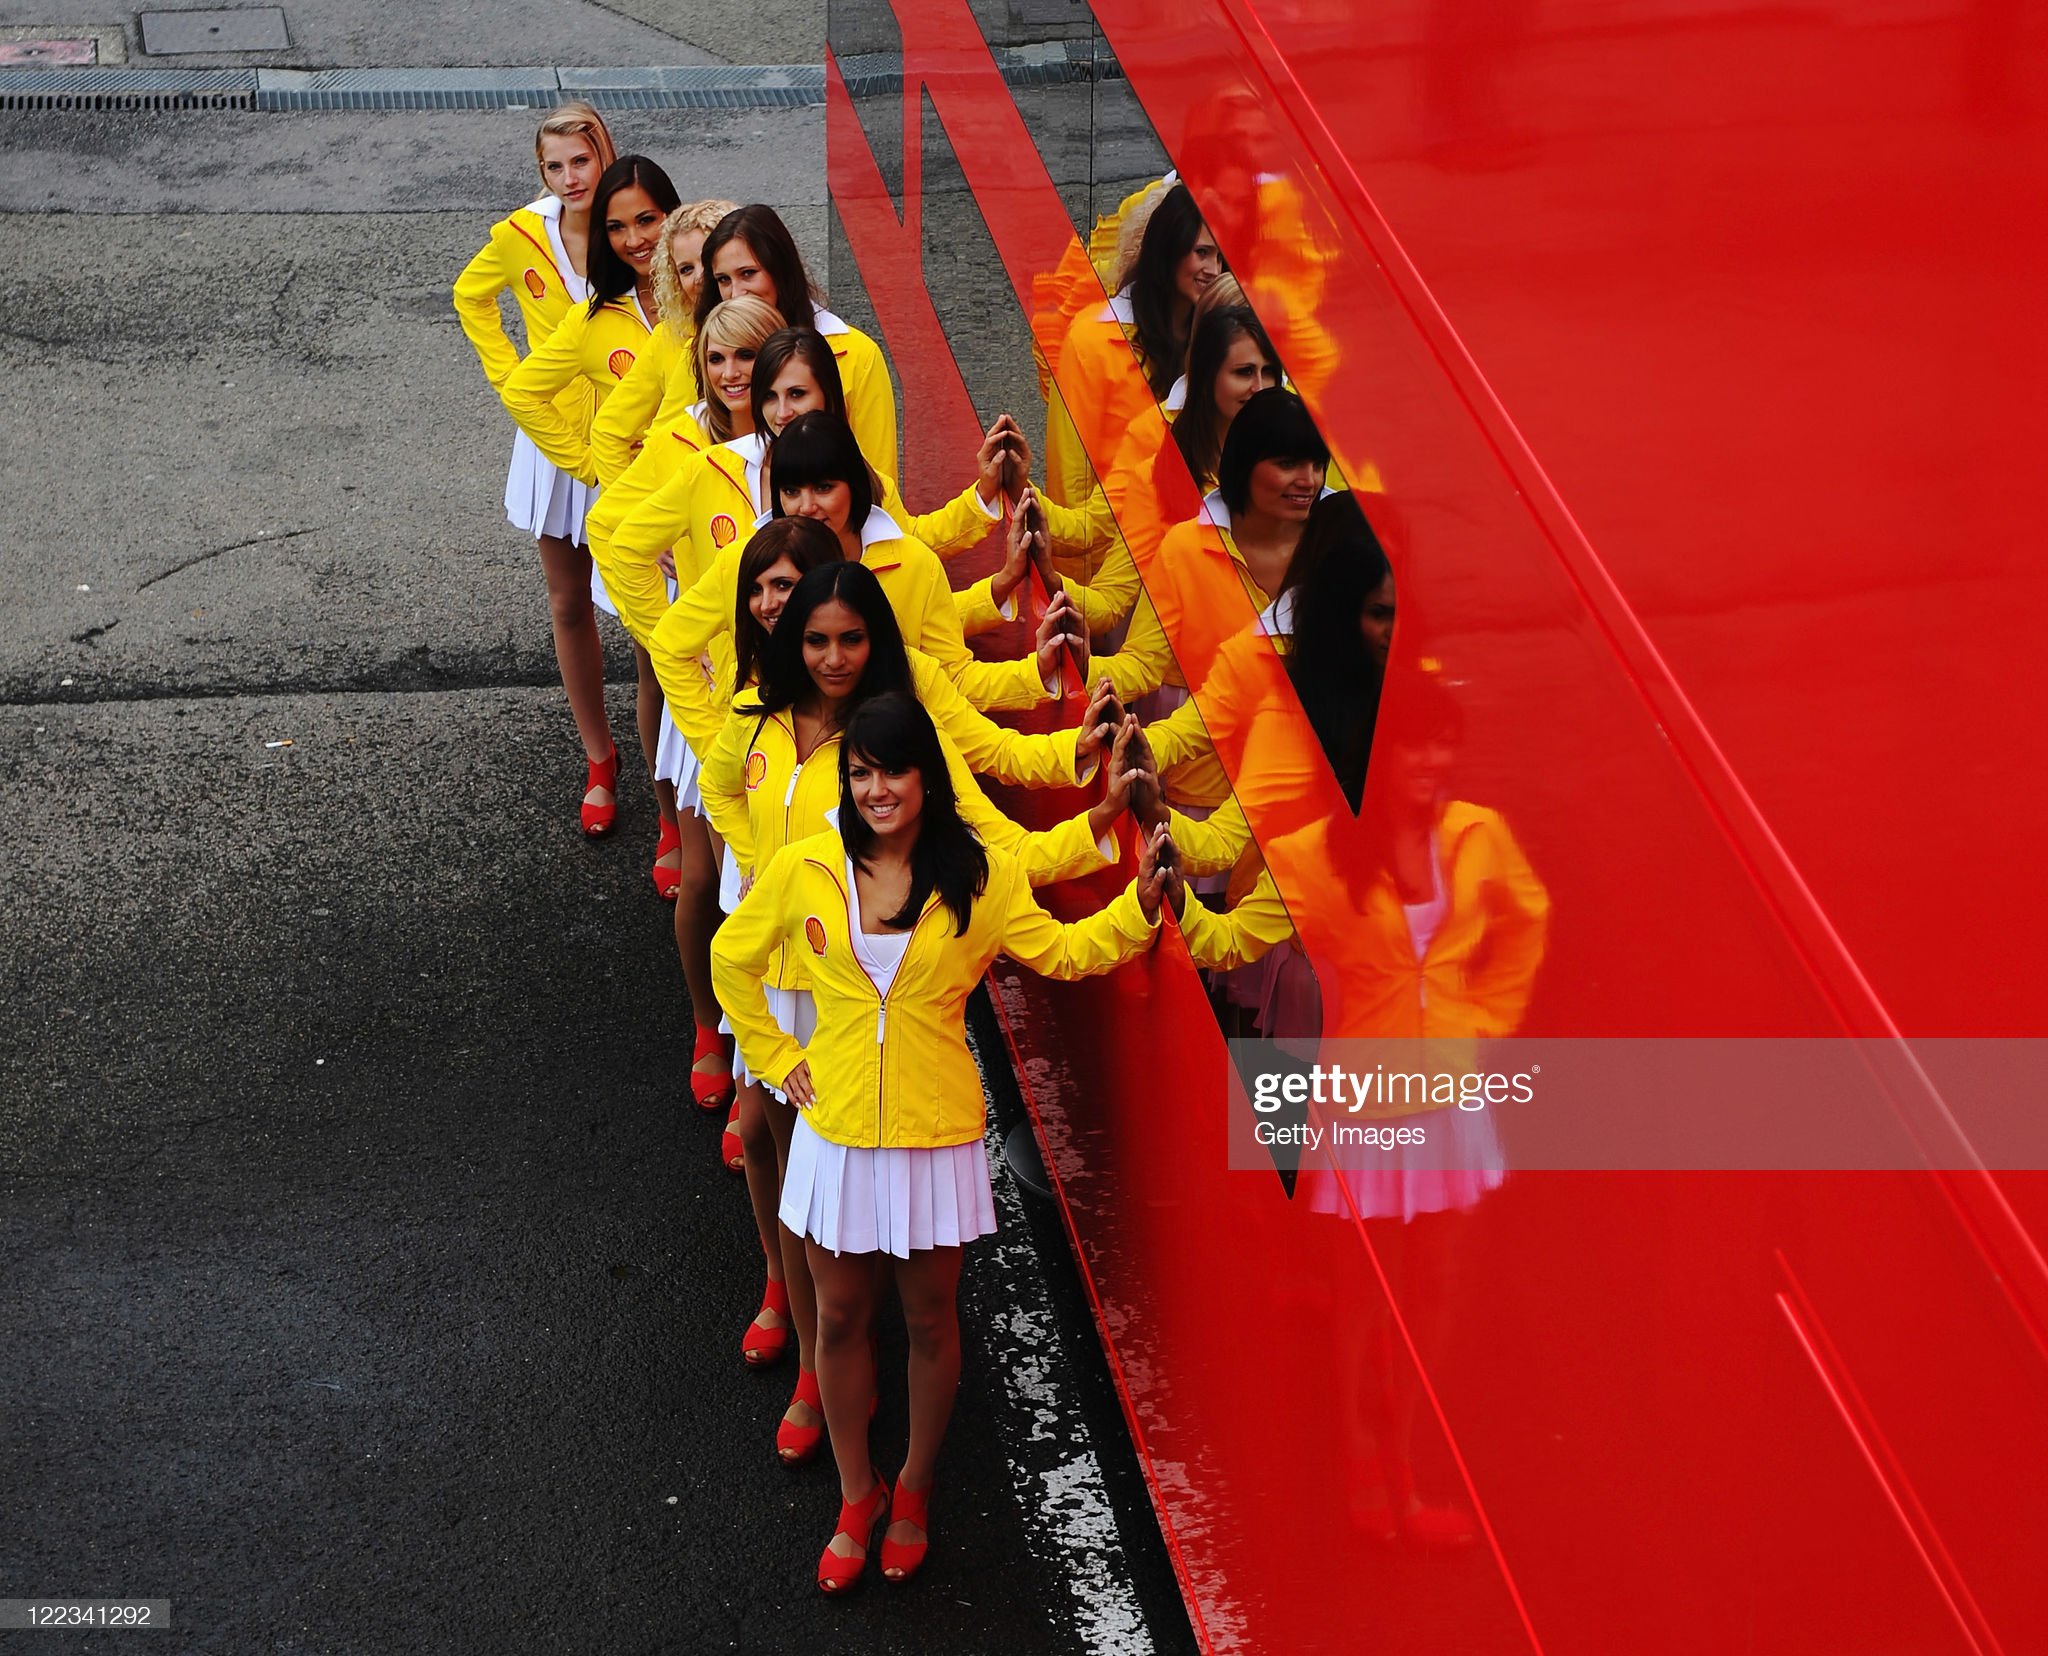 Shell grid girls pose for a photograph outside the Ferrari hospitality unit before the Belgian Formula One Grand Prix at the Circuit of Spa Francorchamps on August 28, 2011.